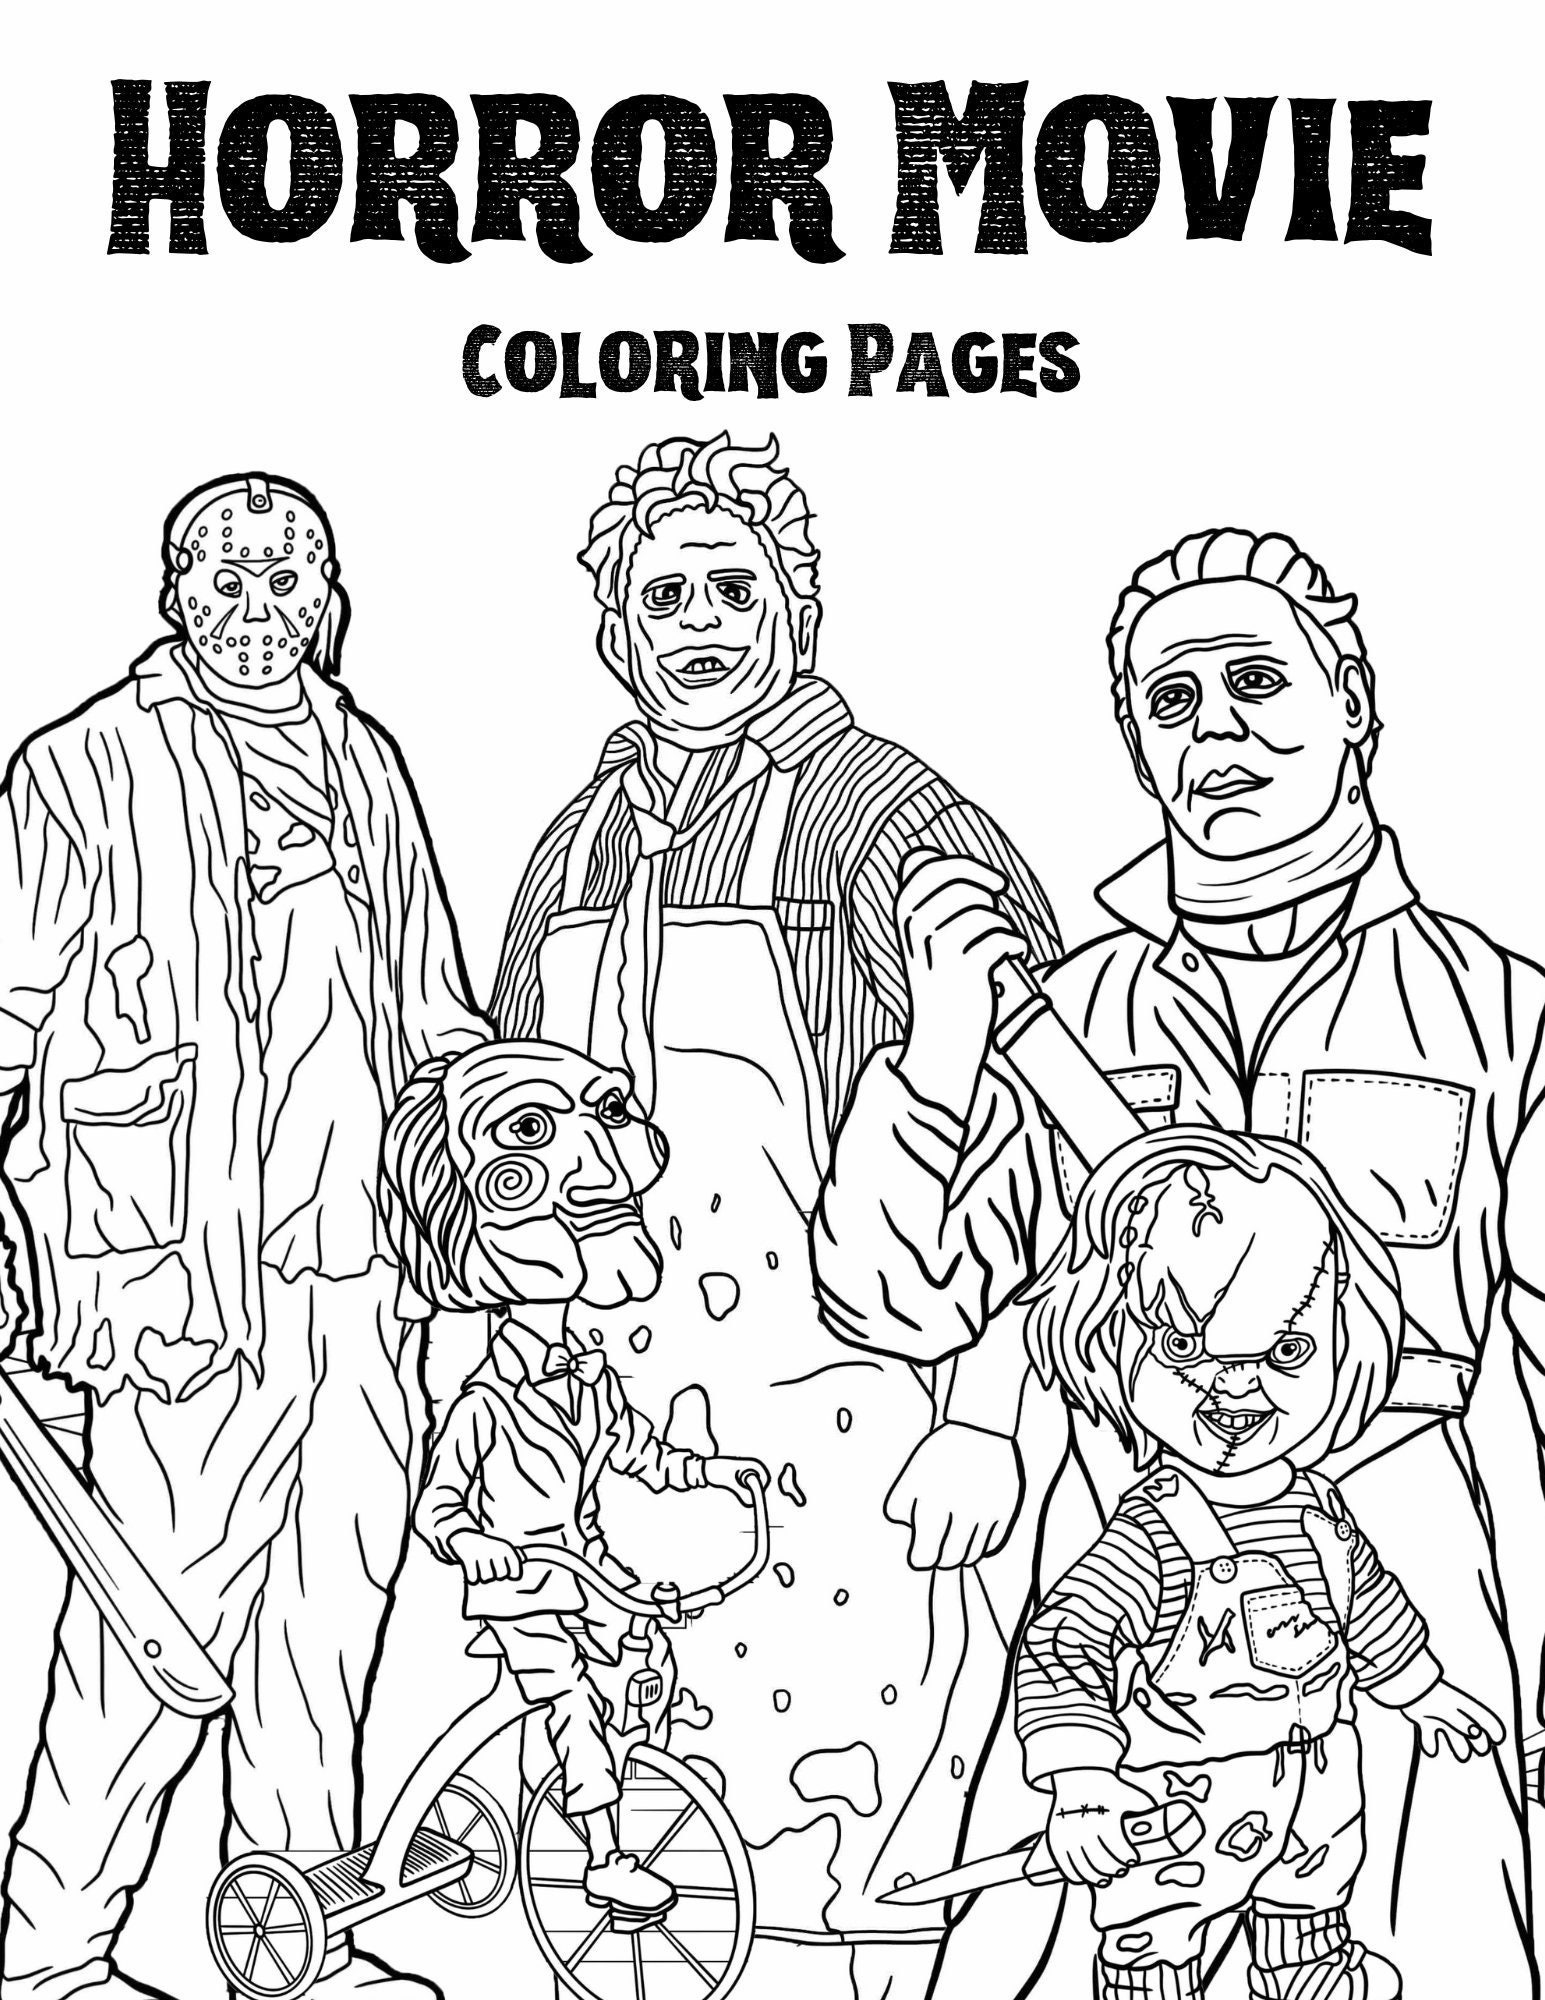 Horror movie coloring pages downloadable printable perfect for halloween horror movie fans